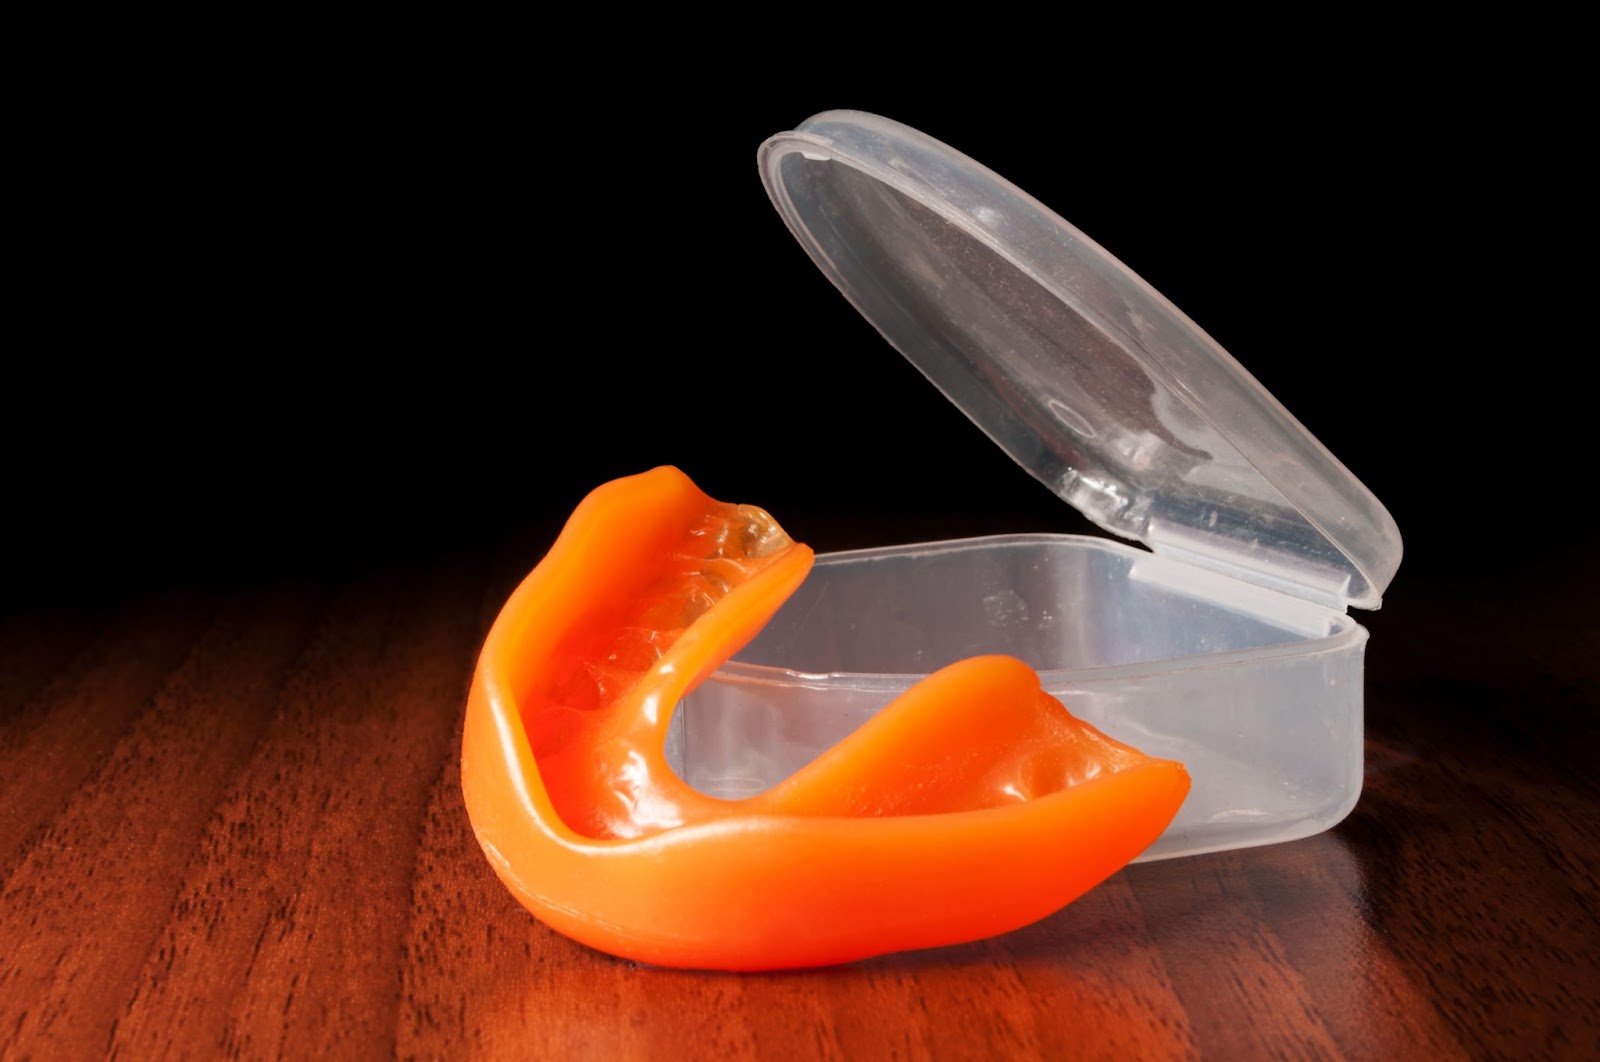 How Should A Mouthguard Fit